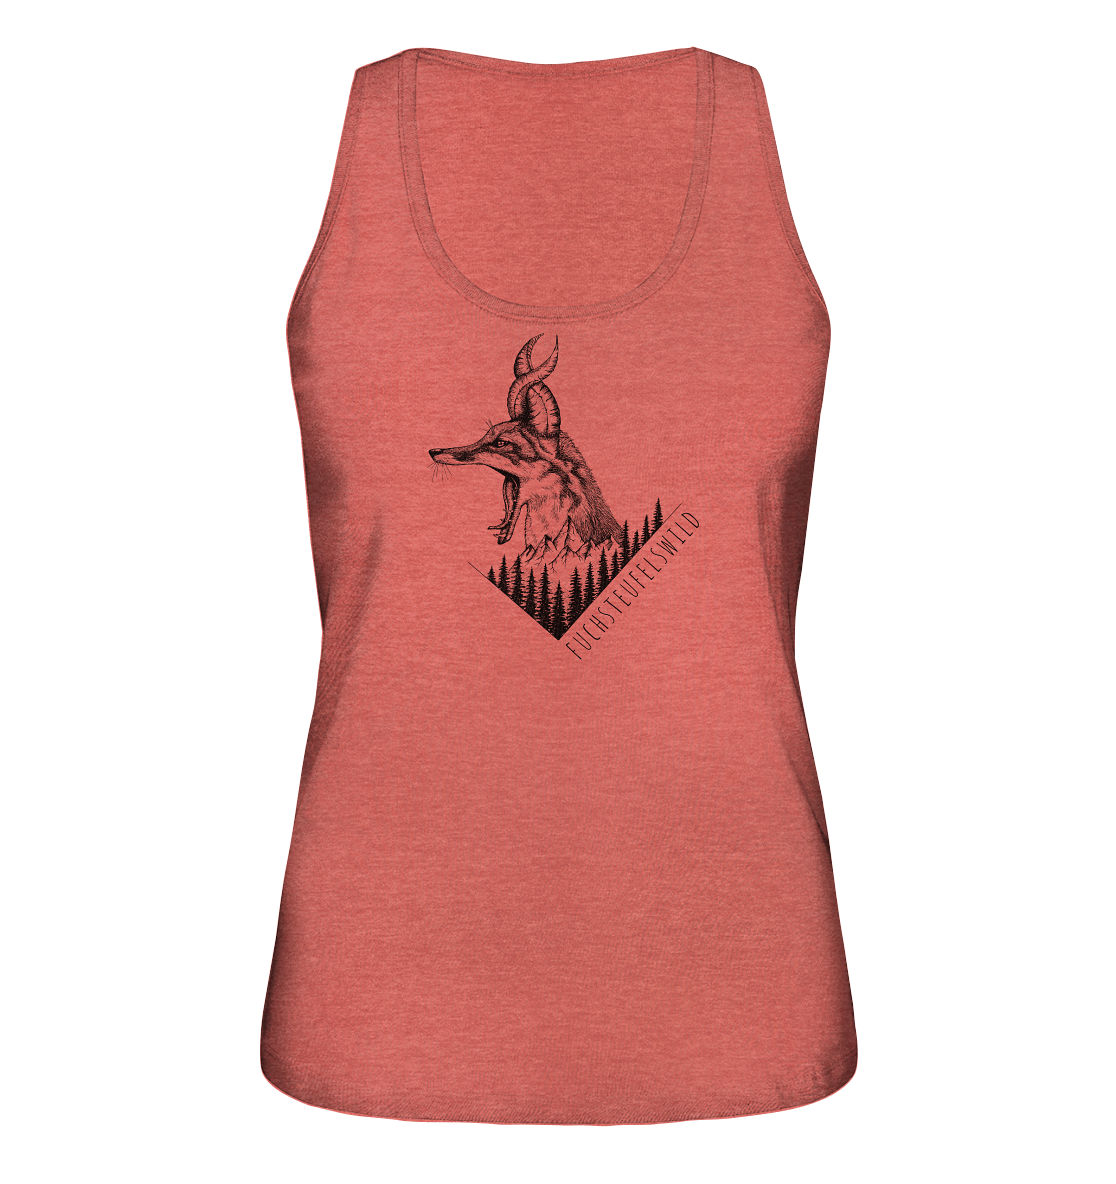 front-ladies-organic-tank-top-e05651-1116x-28.png